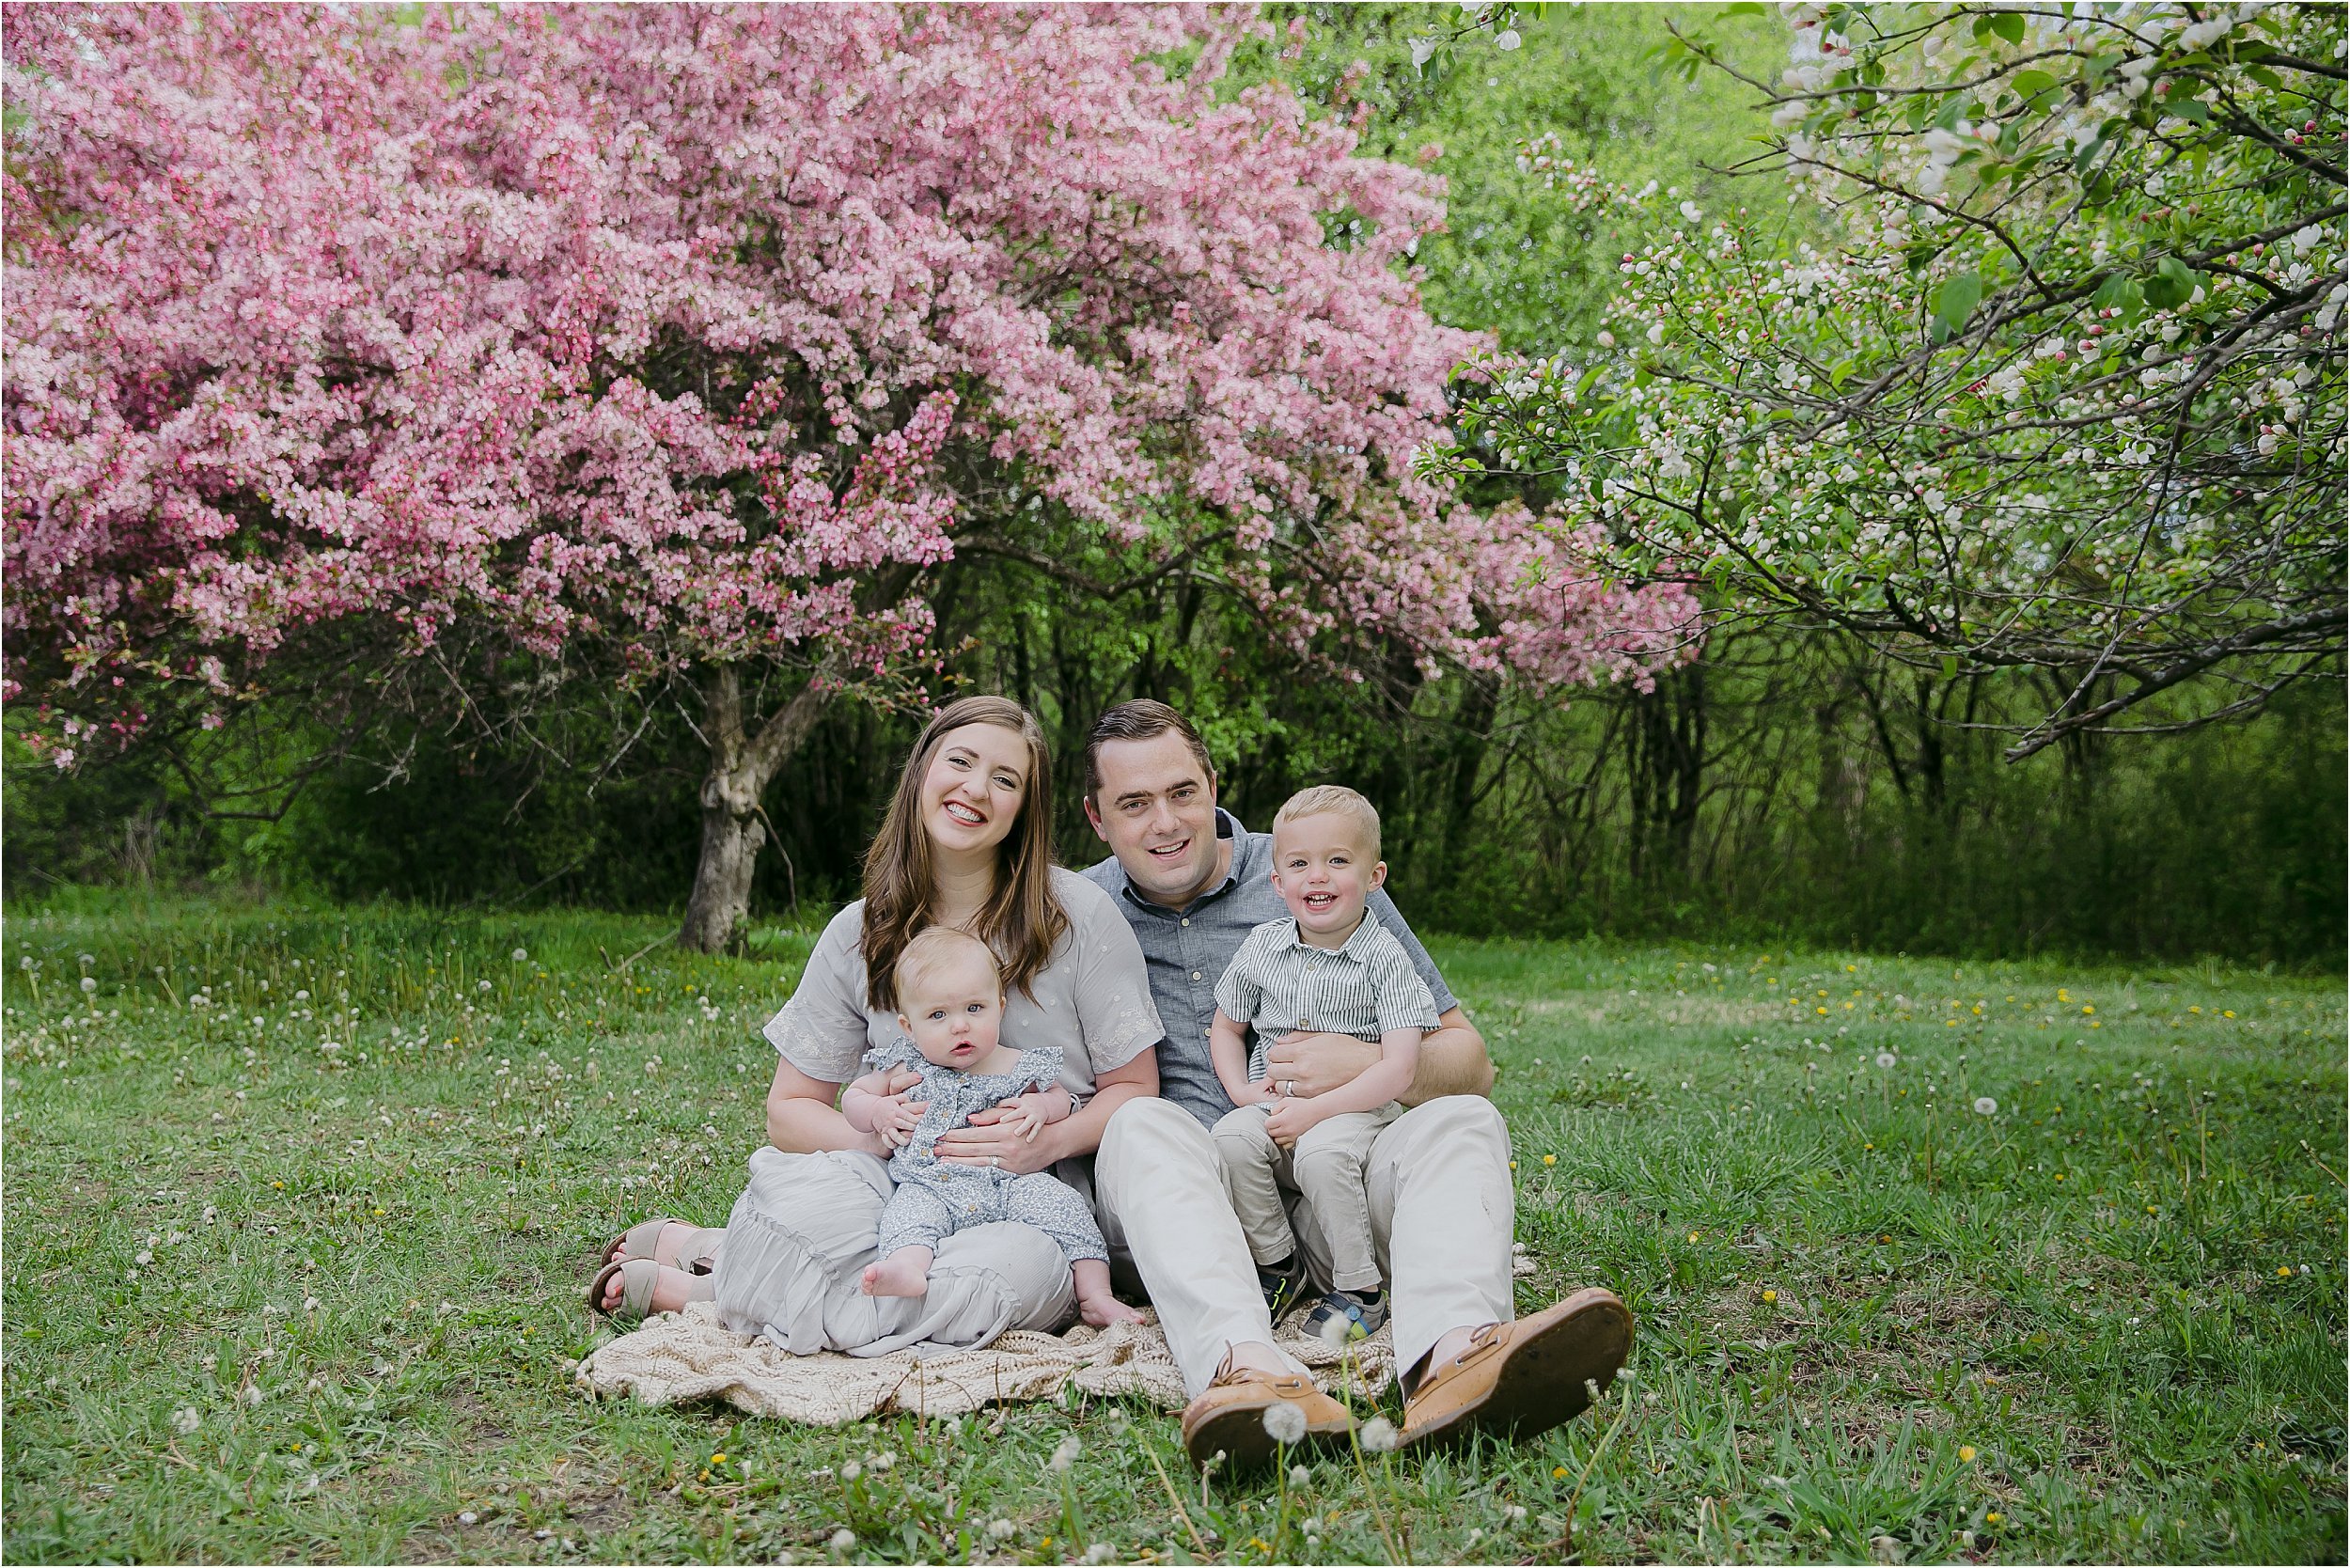 010-pink-flowering-trees-family-two-small-children-in-laps.JPG